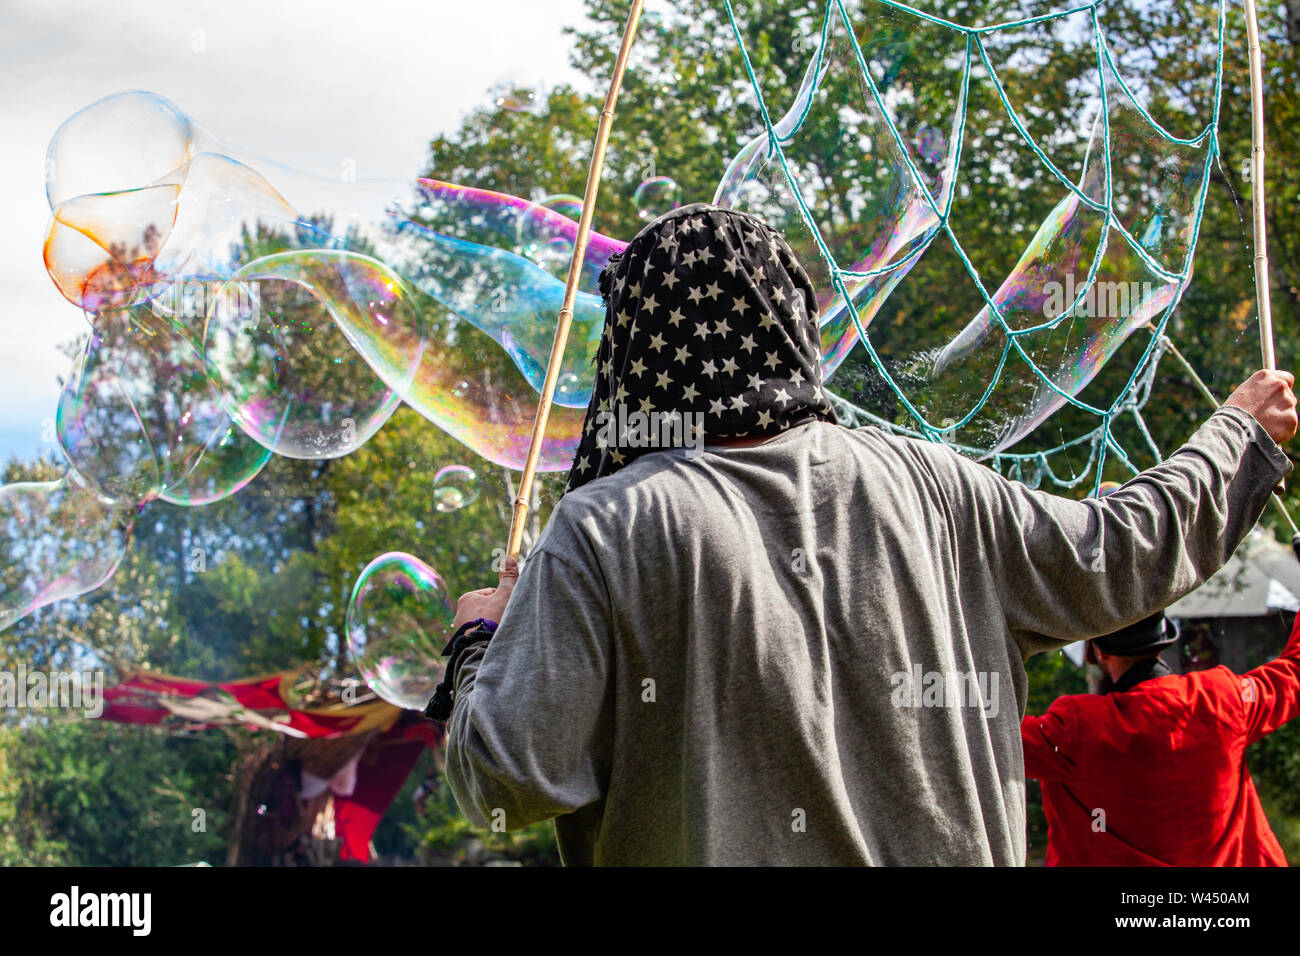 Iridescent bubbles are seen coming from a structure crafted with bamboo and string, held by a pagan during a celebration of native traditions. Stock Photo